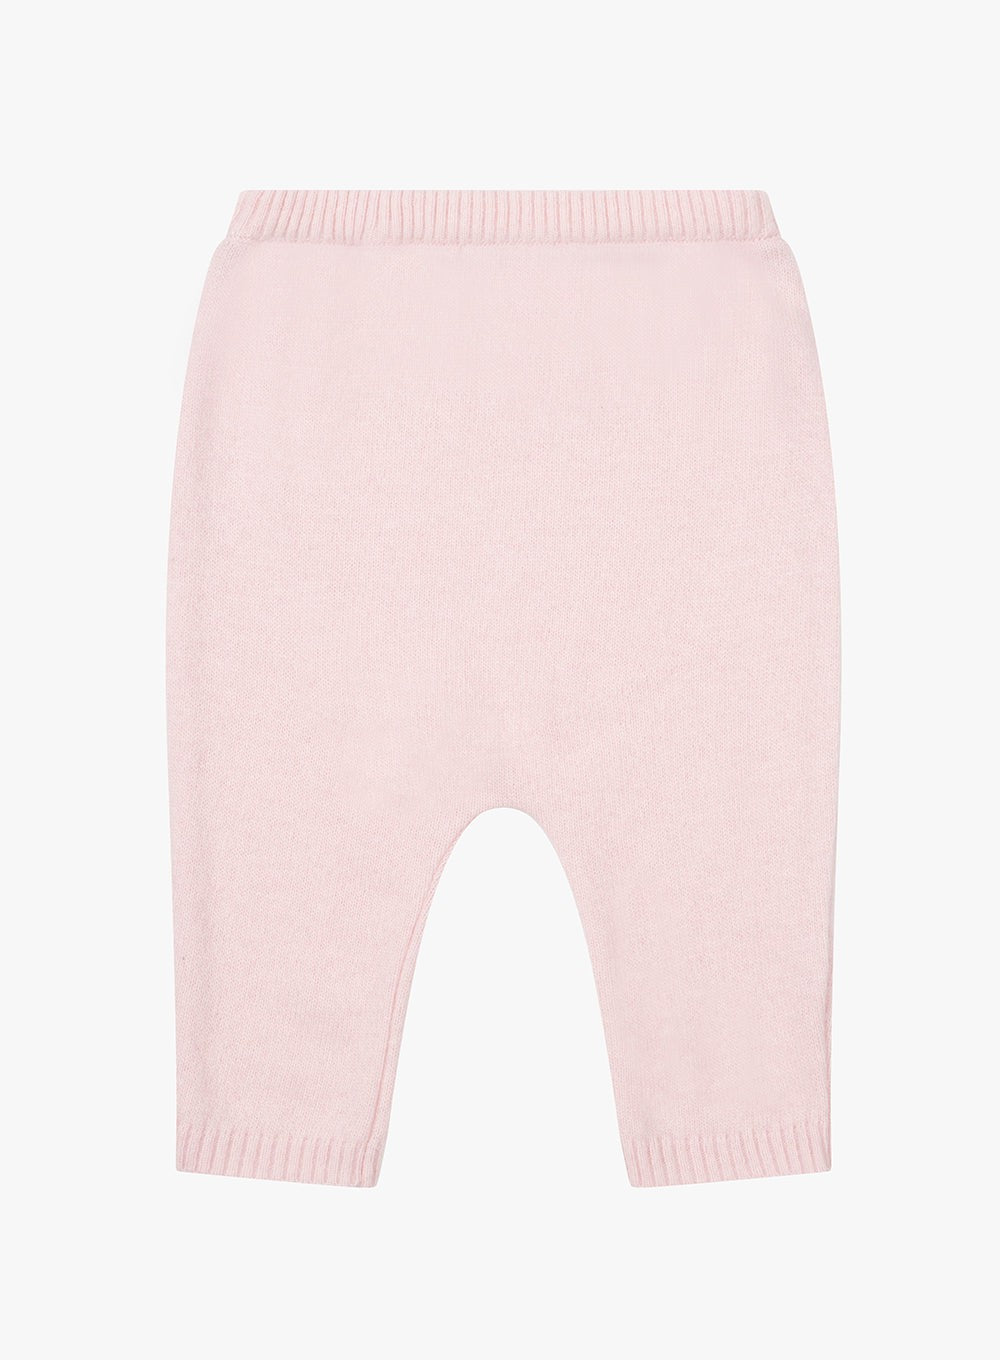 Lapinou All-in-One Little Knitted Set in Pink Eloise